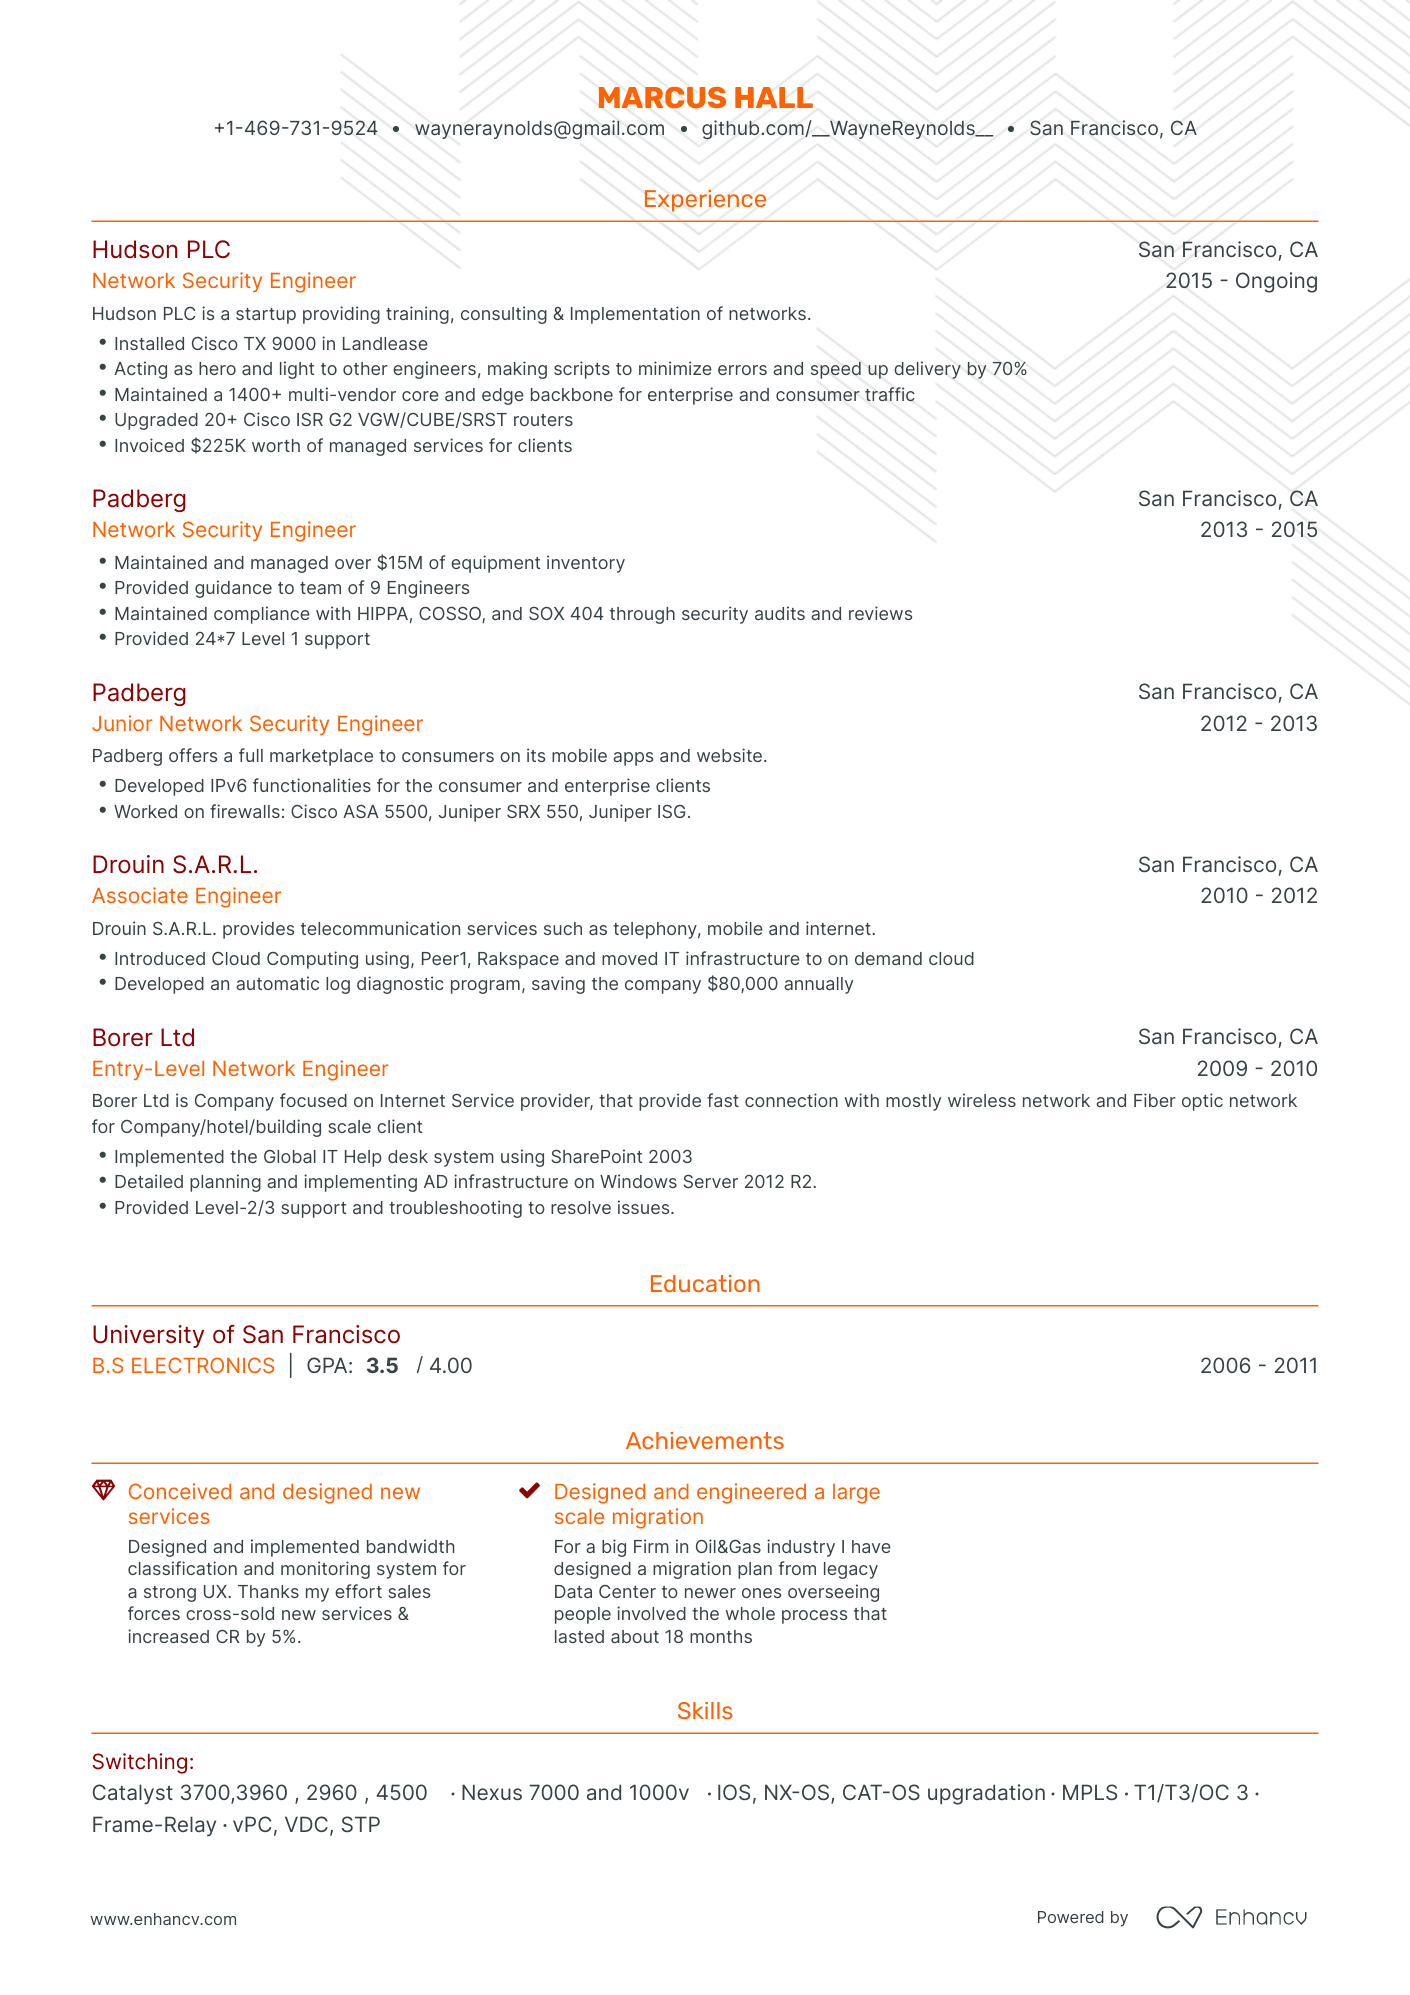 Traditional Network Security Engineer Resume Template